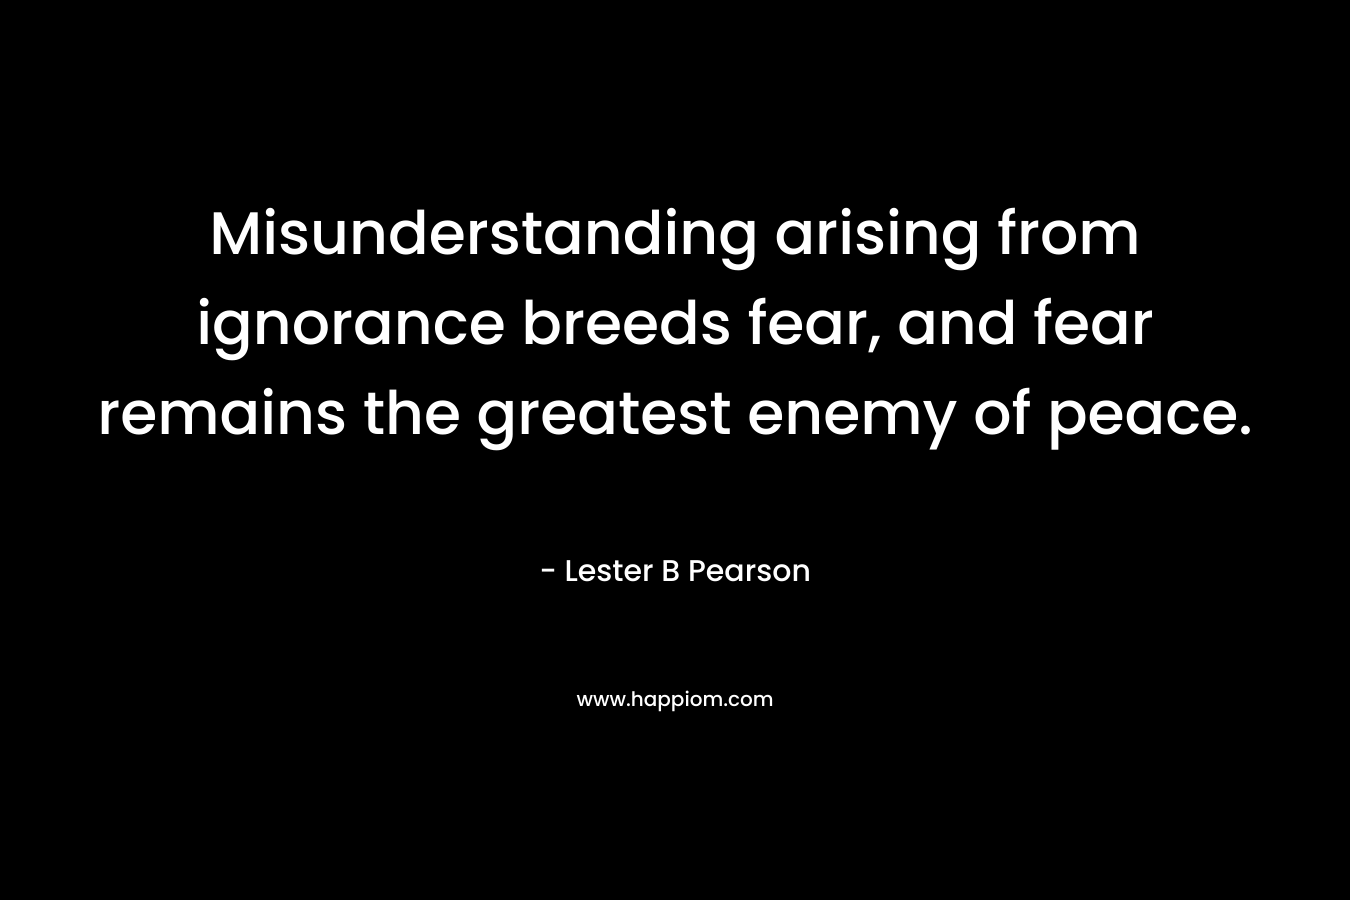 Misunderstanding arising from ignorance breeds fear, and fear remains the greatest enemy of peace.